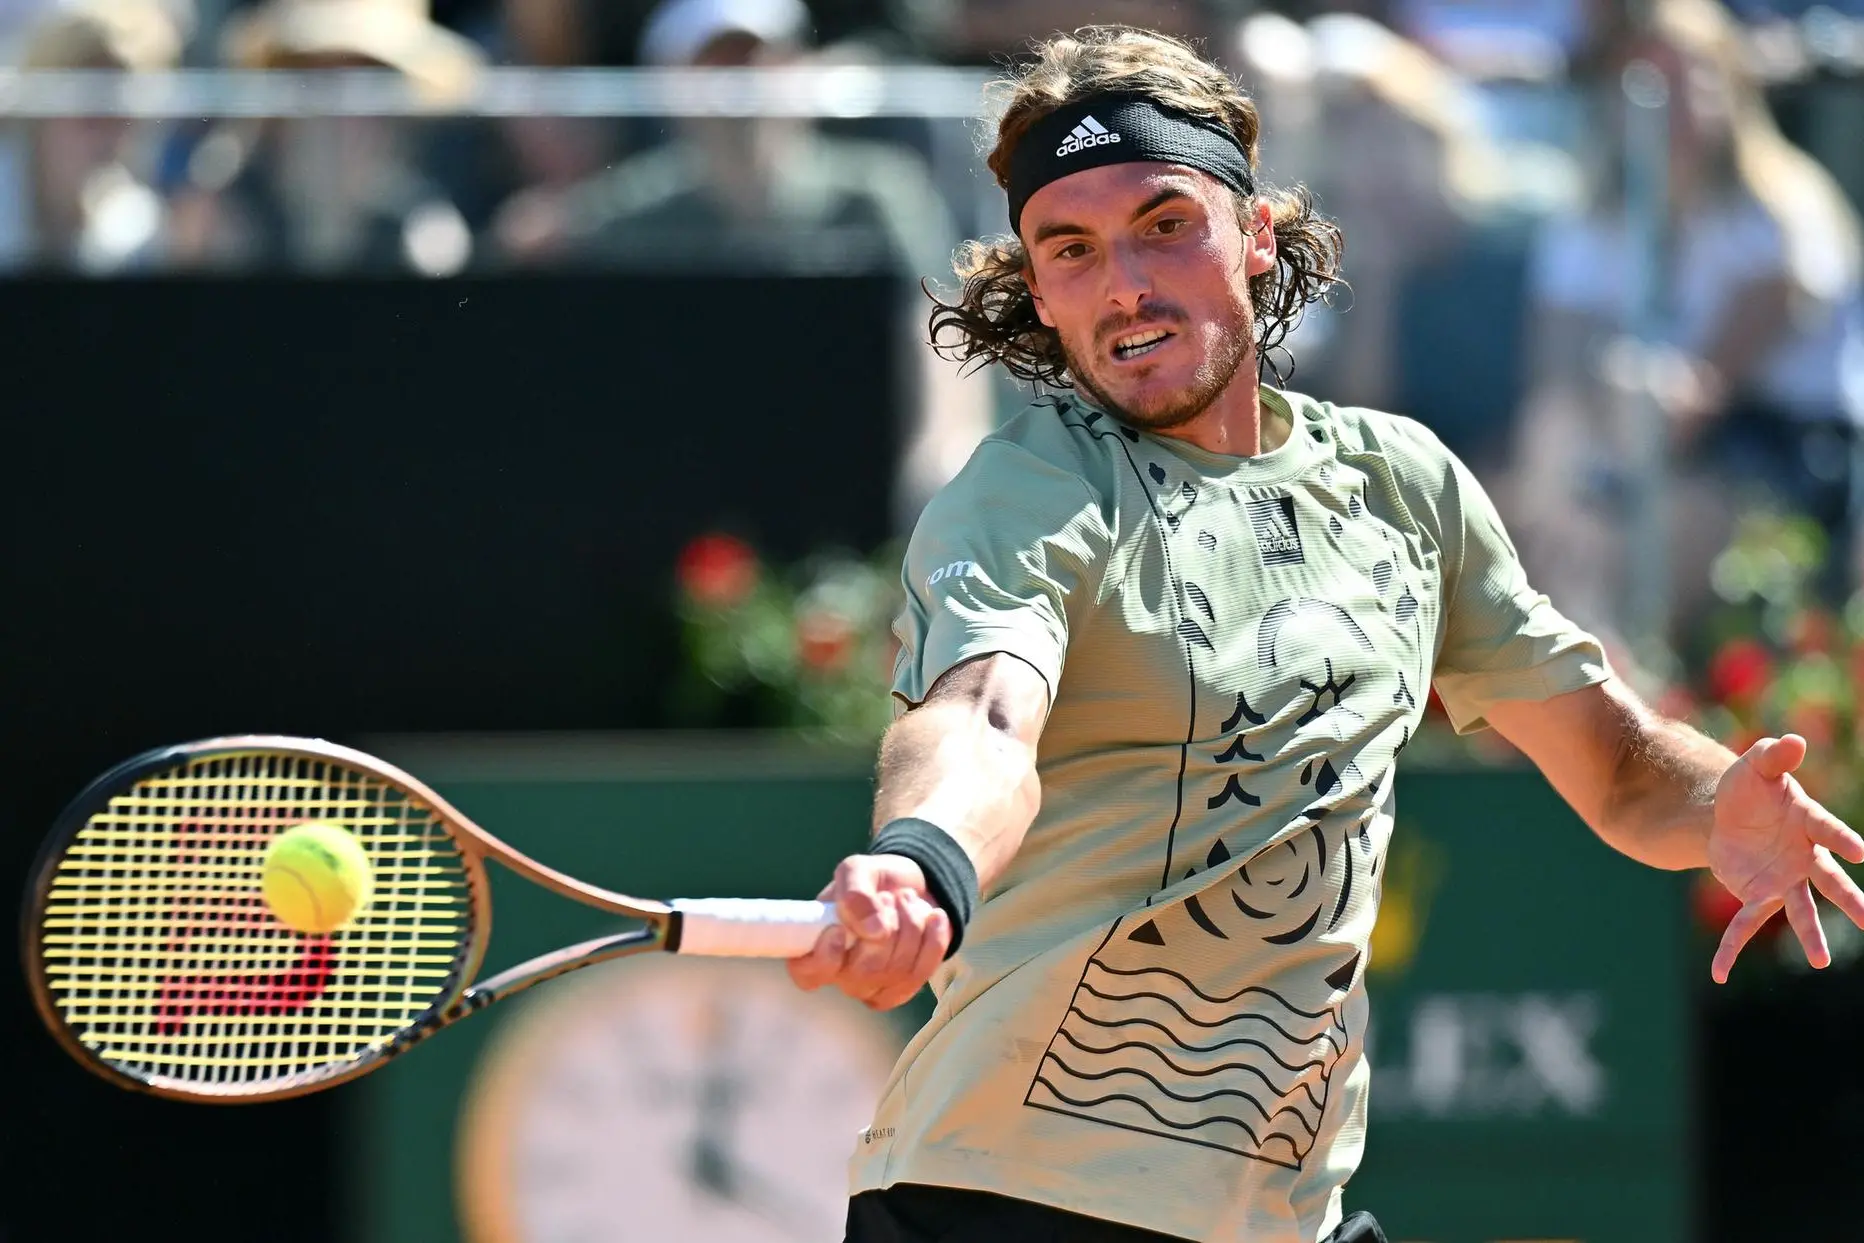 Stefanos Tsitsipas of Greece in action during his men's singles semifinal match against Alexander Zverev of Germany at the Italian Open tennis tournament in Rome, Italy, 14 May 2022. ANSA/ETTORE FERRARI